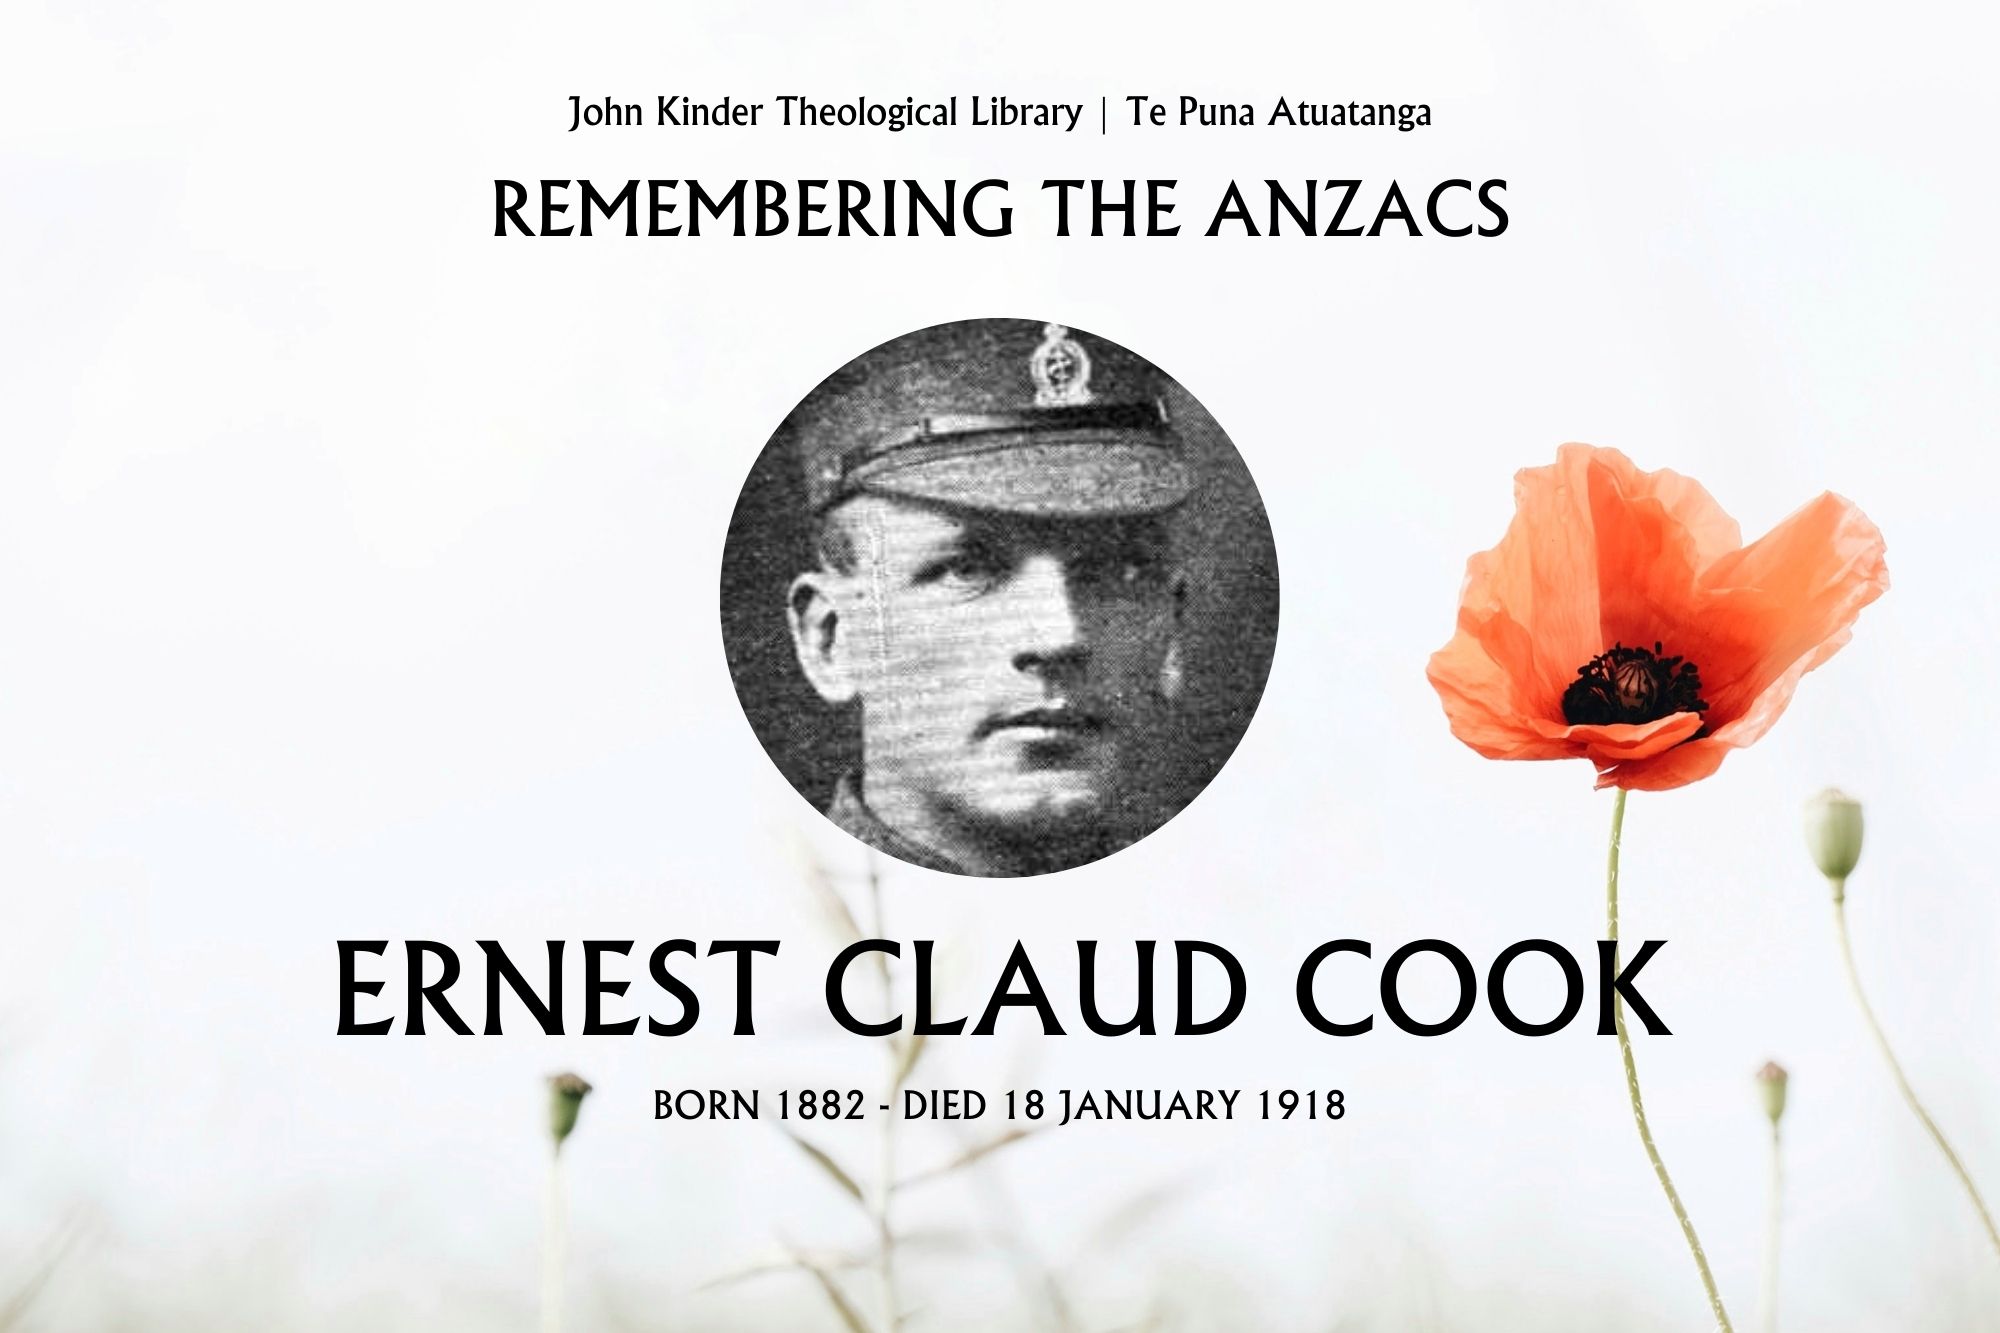 Remembering the ANZACs - John Kinder Theological Library - St John's College - Ernest Claud Cook